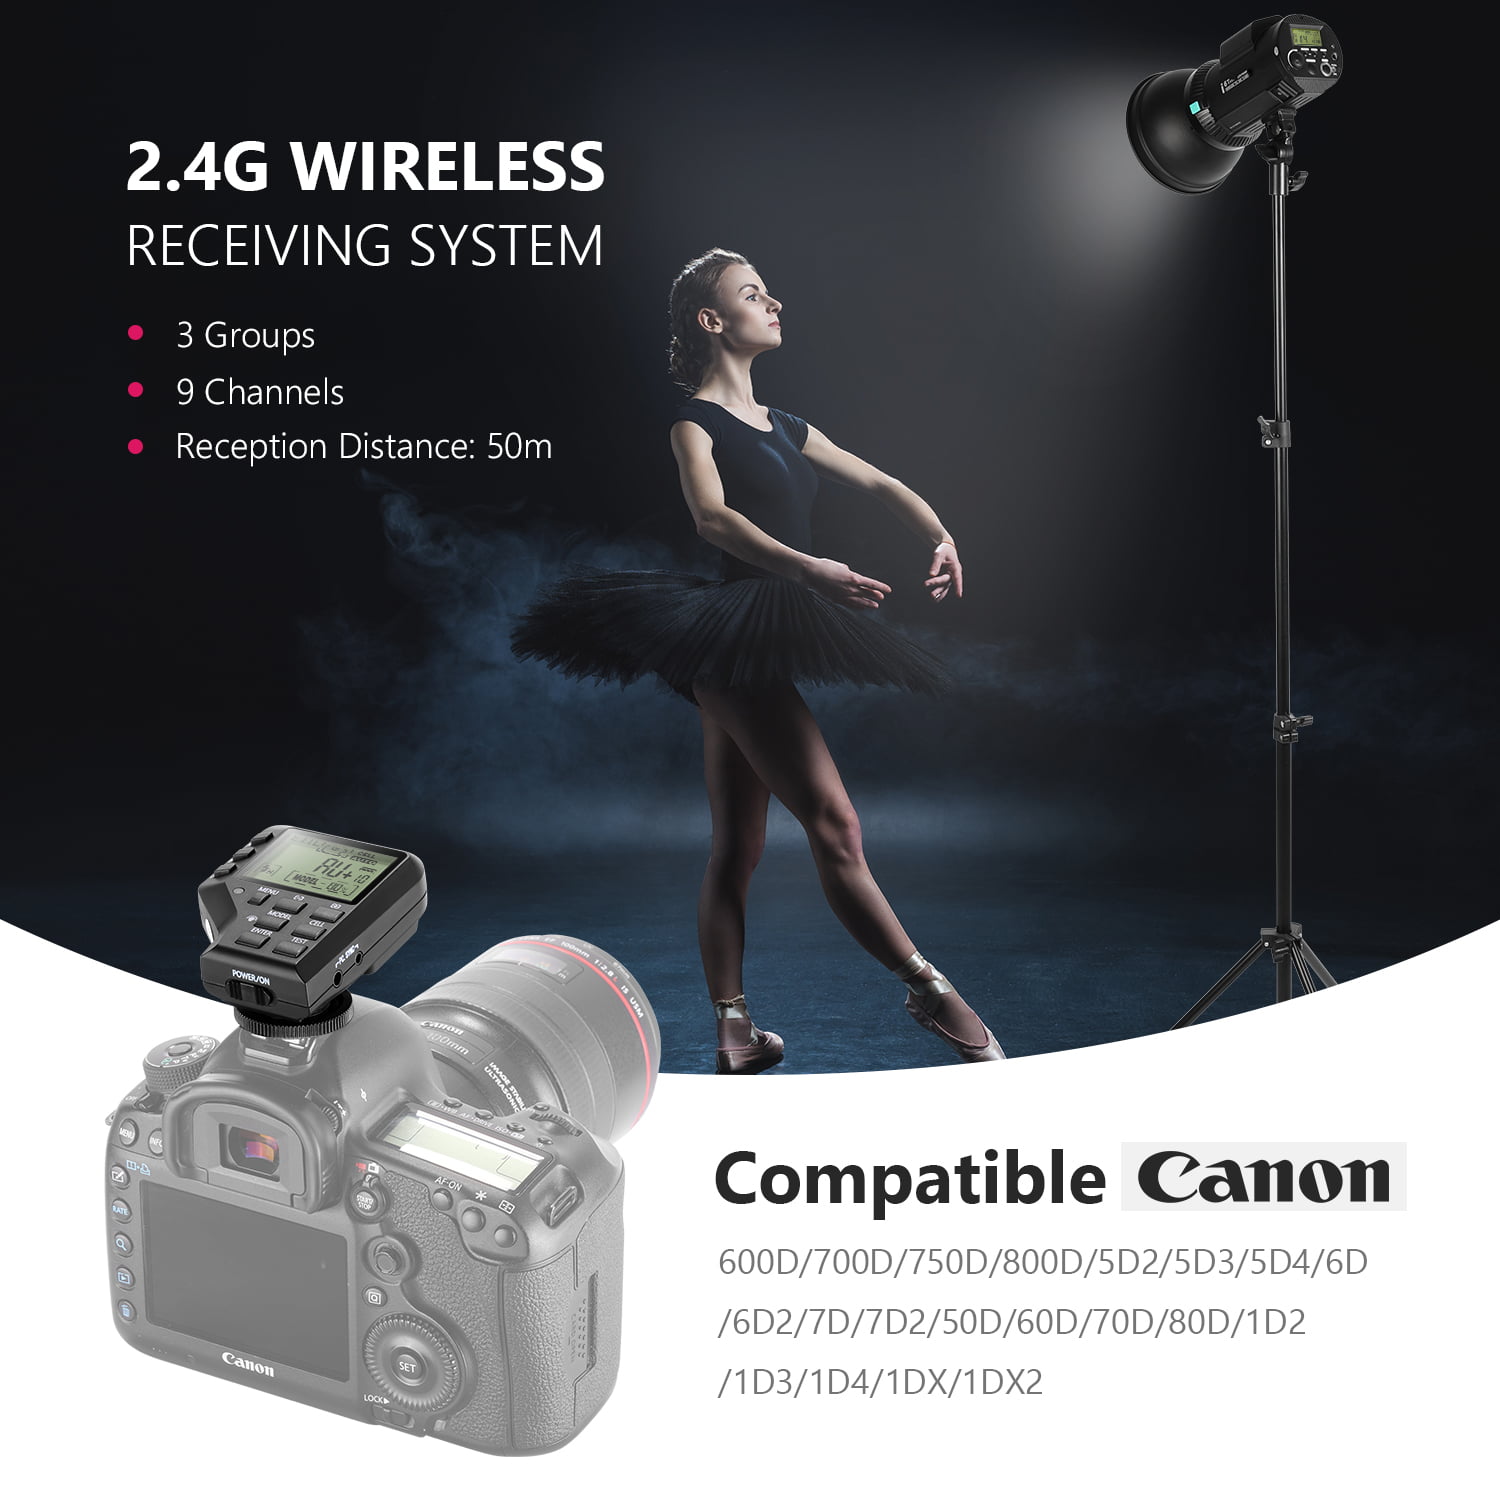 400 Full Power Flashes Neewer i6T EX 600W 2.4G TTL Studio Strobe 1/8000 HSS Flash Monolight Compatible with Canon，Wireless Trigger/Modeling Lamp/Recycle in 0.2-1 Sec/Lithium Battery /Bowens Mount